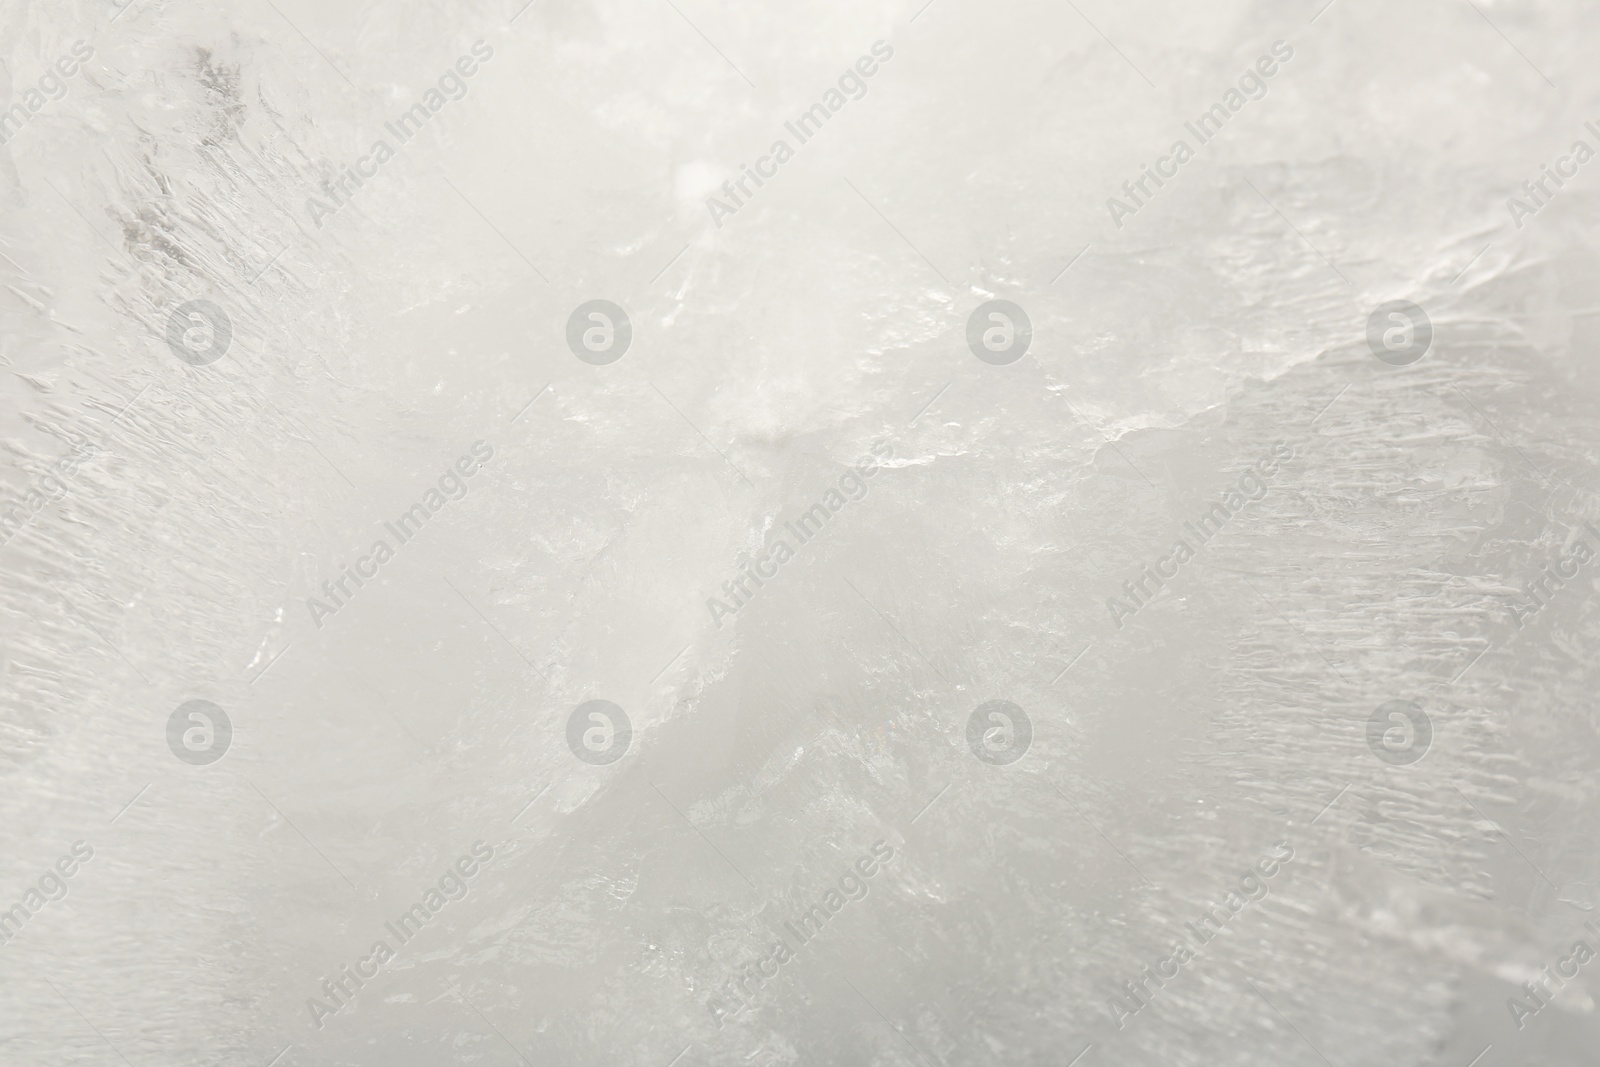 Photo of Crystal clear ice as background, closeup view